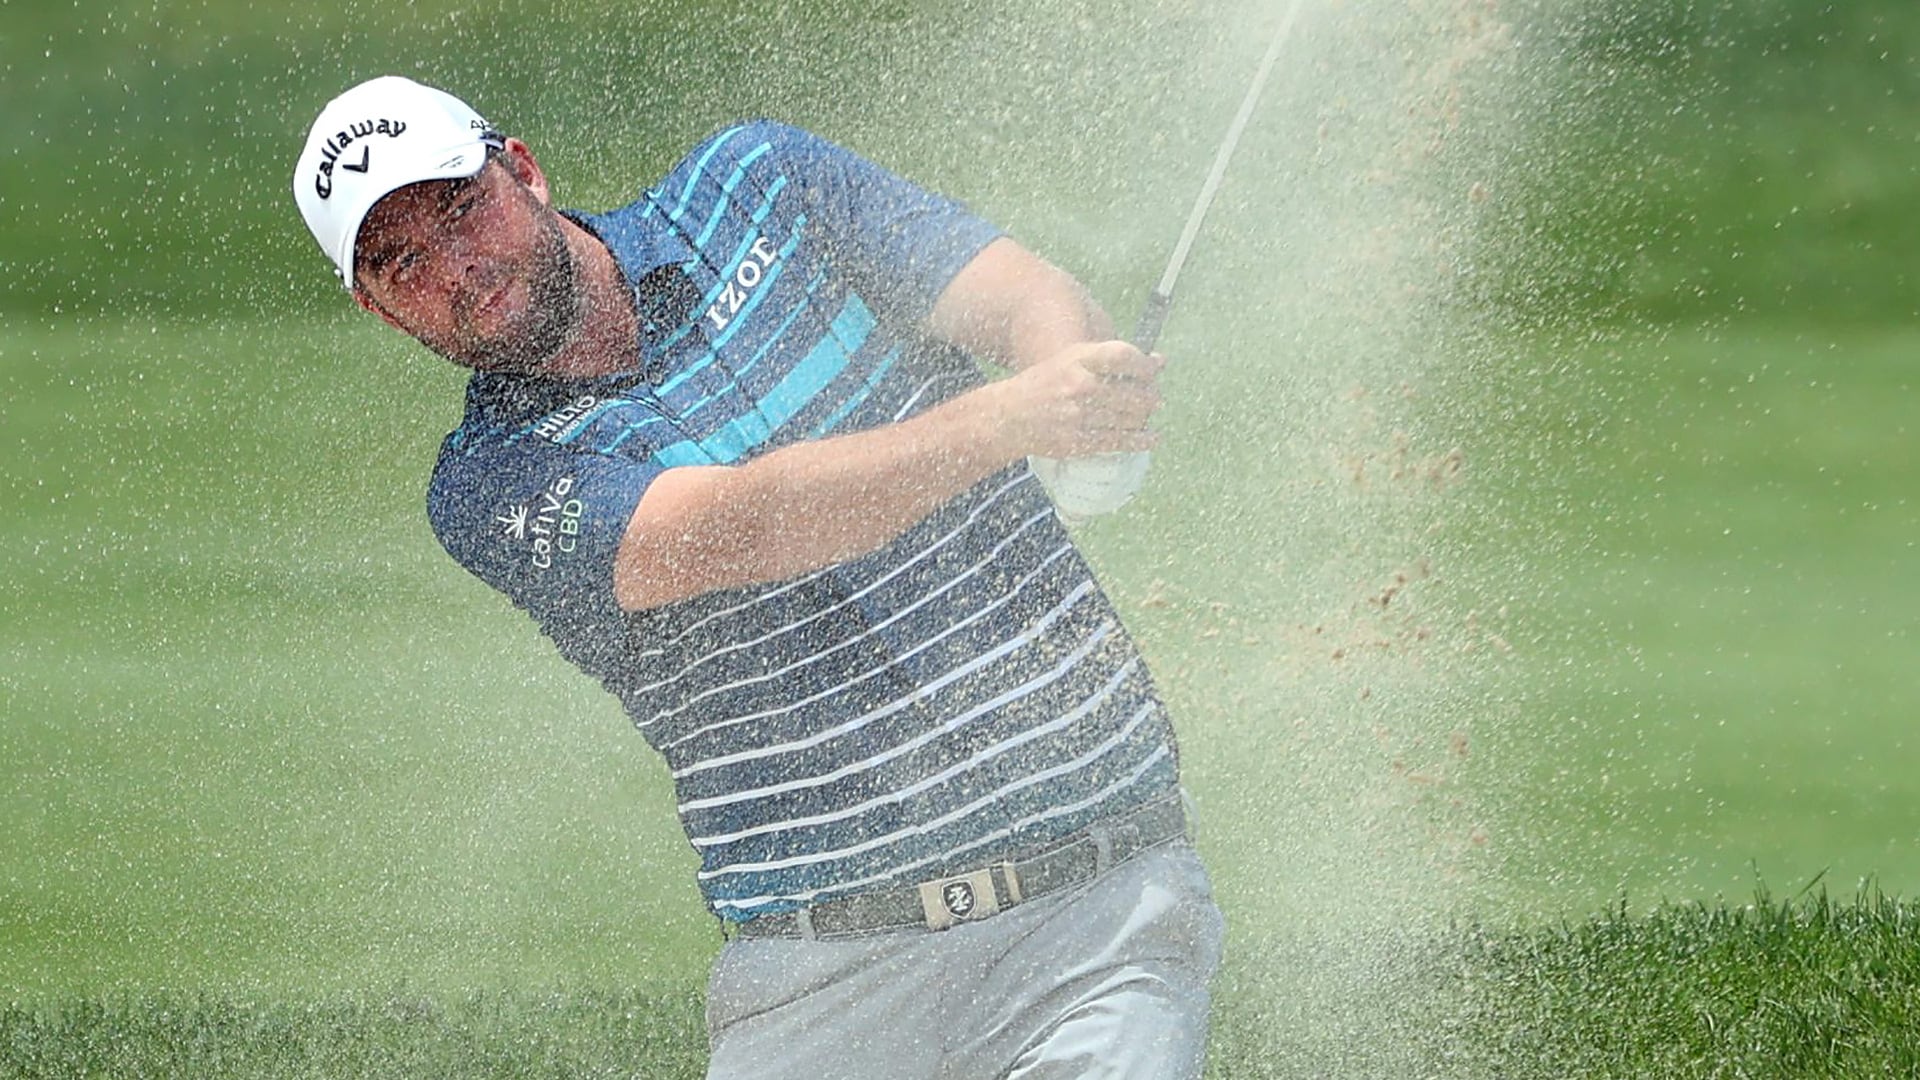 Watch: Marc Leishman nearly hits Corey Conners with bladed bunker shot